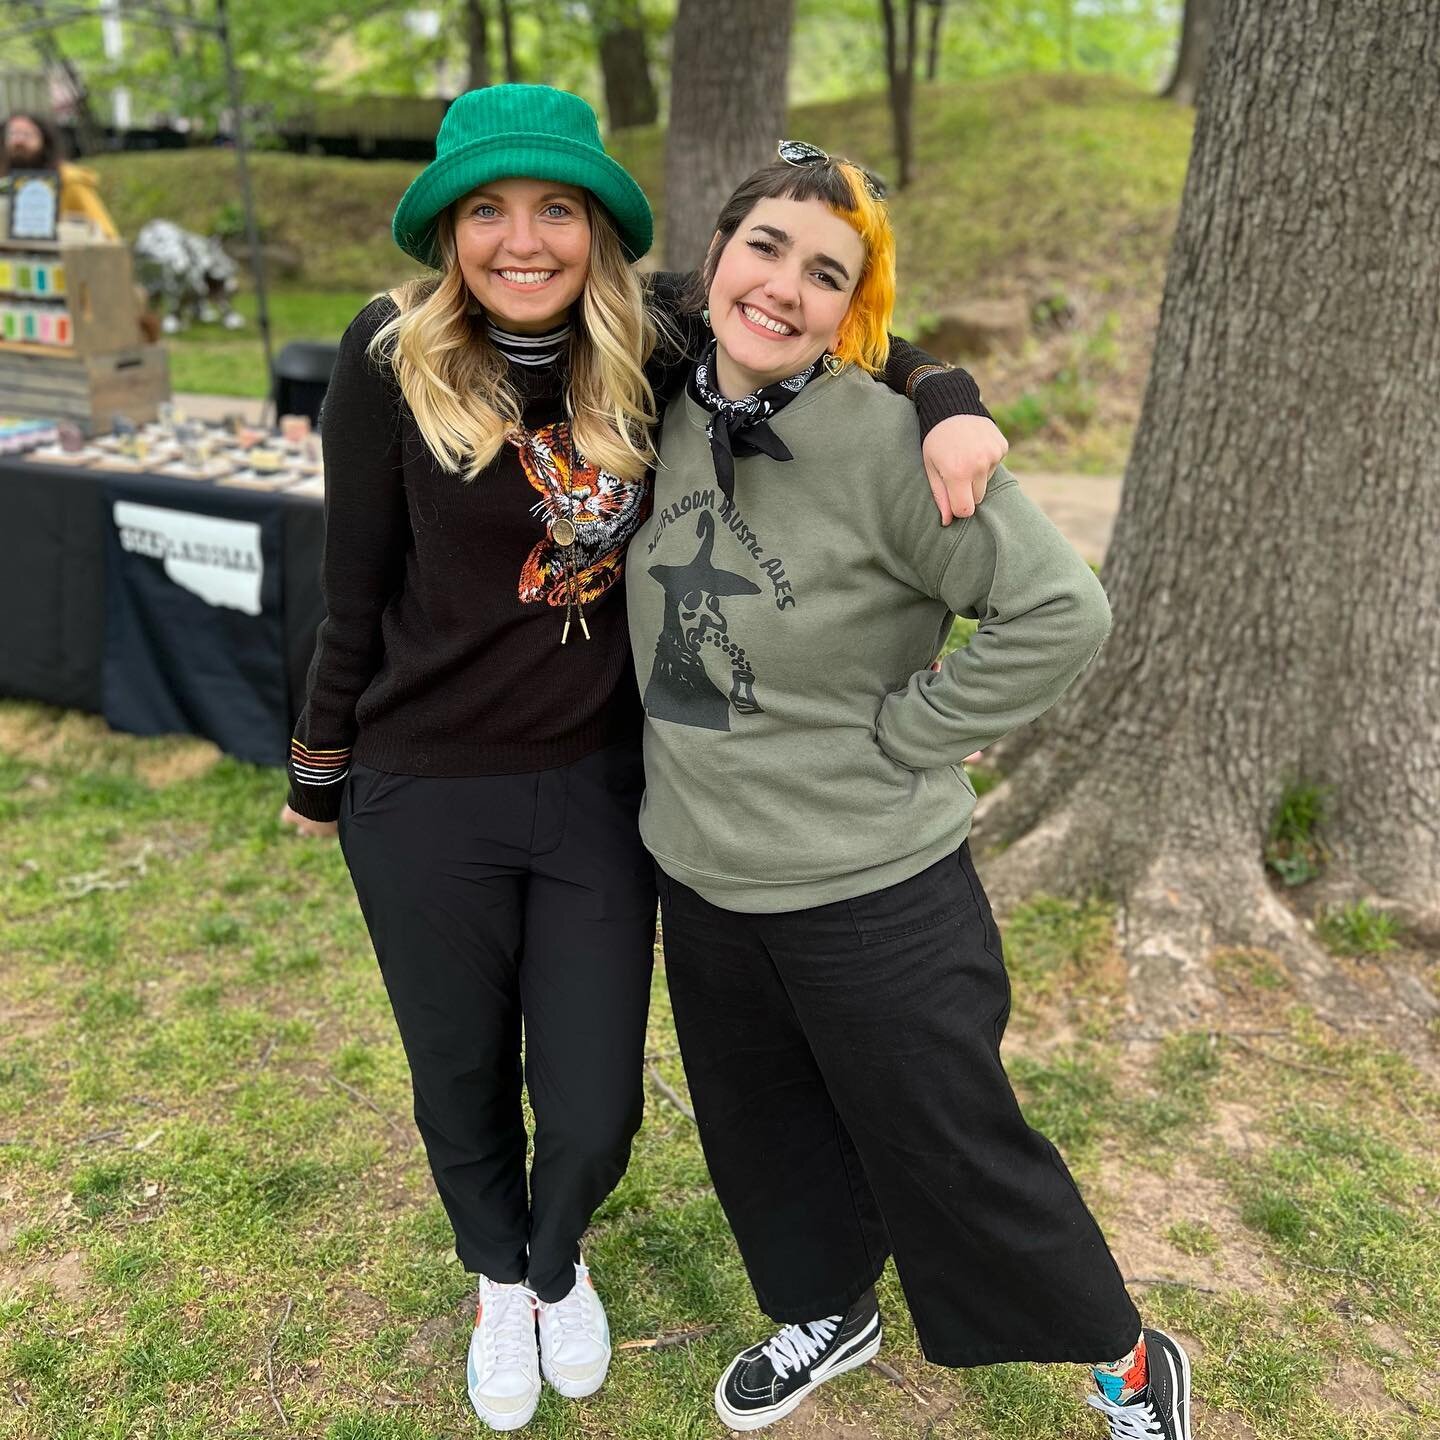 we had so much fun at lager land festival last weekend! thanks to @heirloomrusticales and @philbrookmuseum for the invite and organization! it was such a dreamy lil beer fest and we got to hang out with some of our faves 🥰 it was colder than i antic